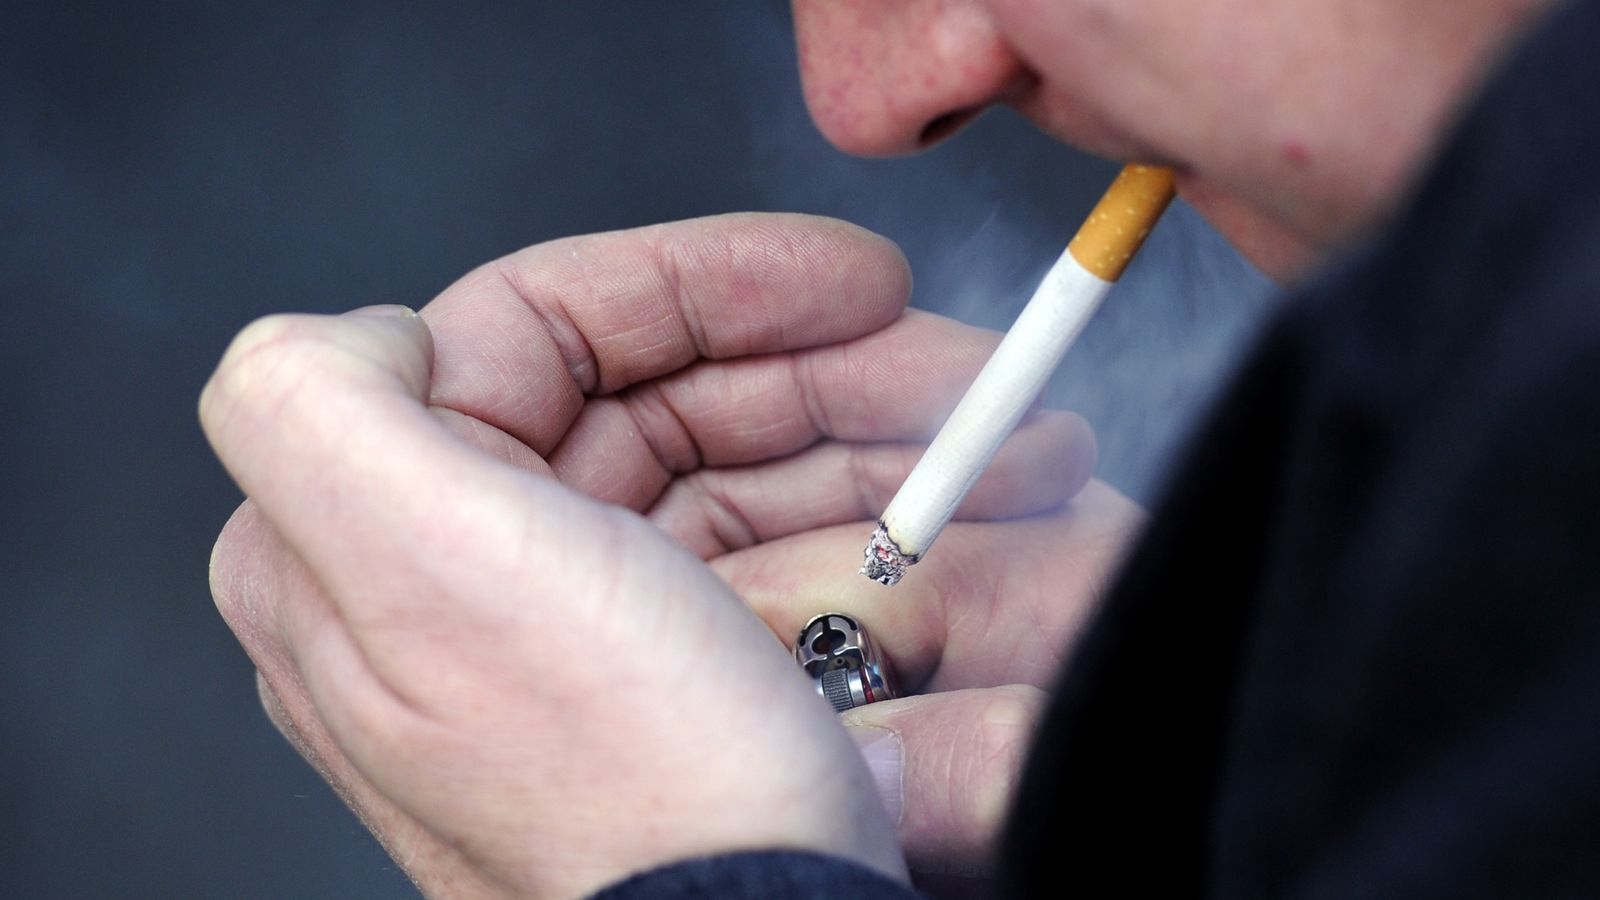 Will the smoking ban be subject to a 'nanny state' backlash?